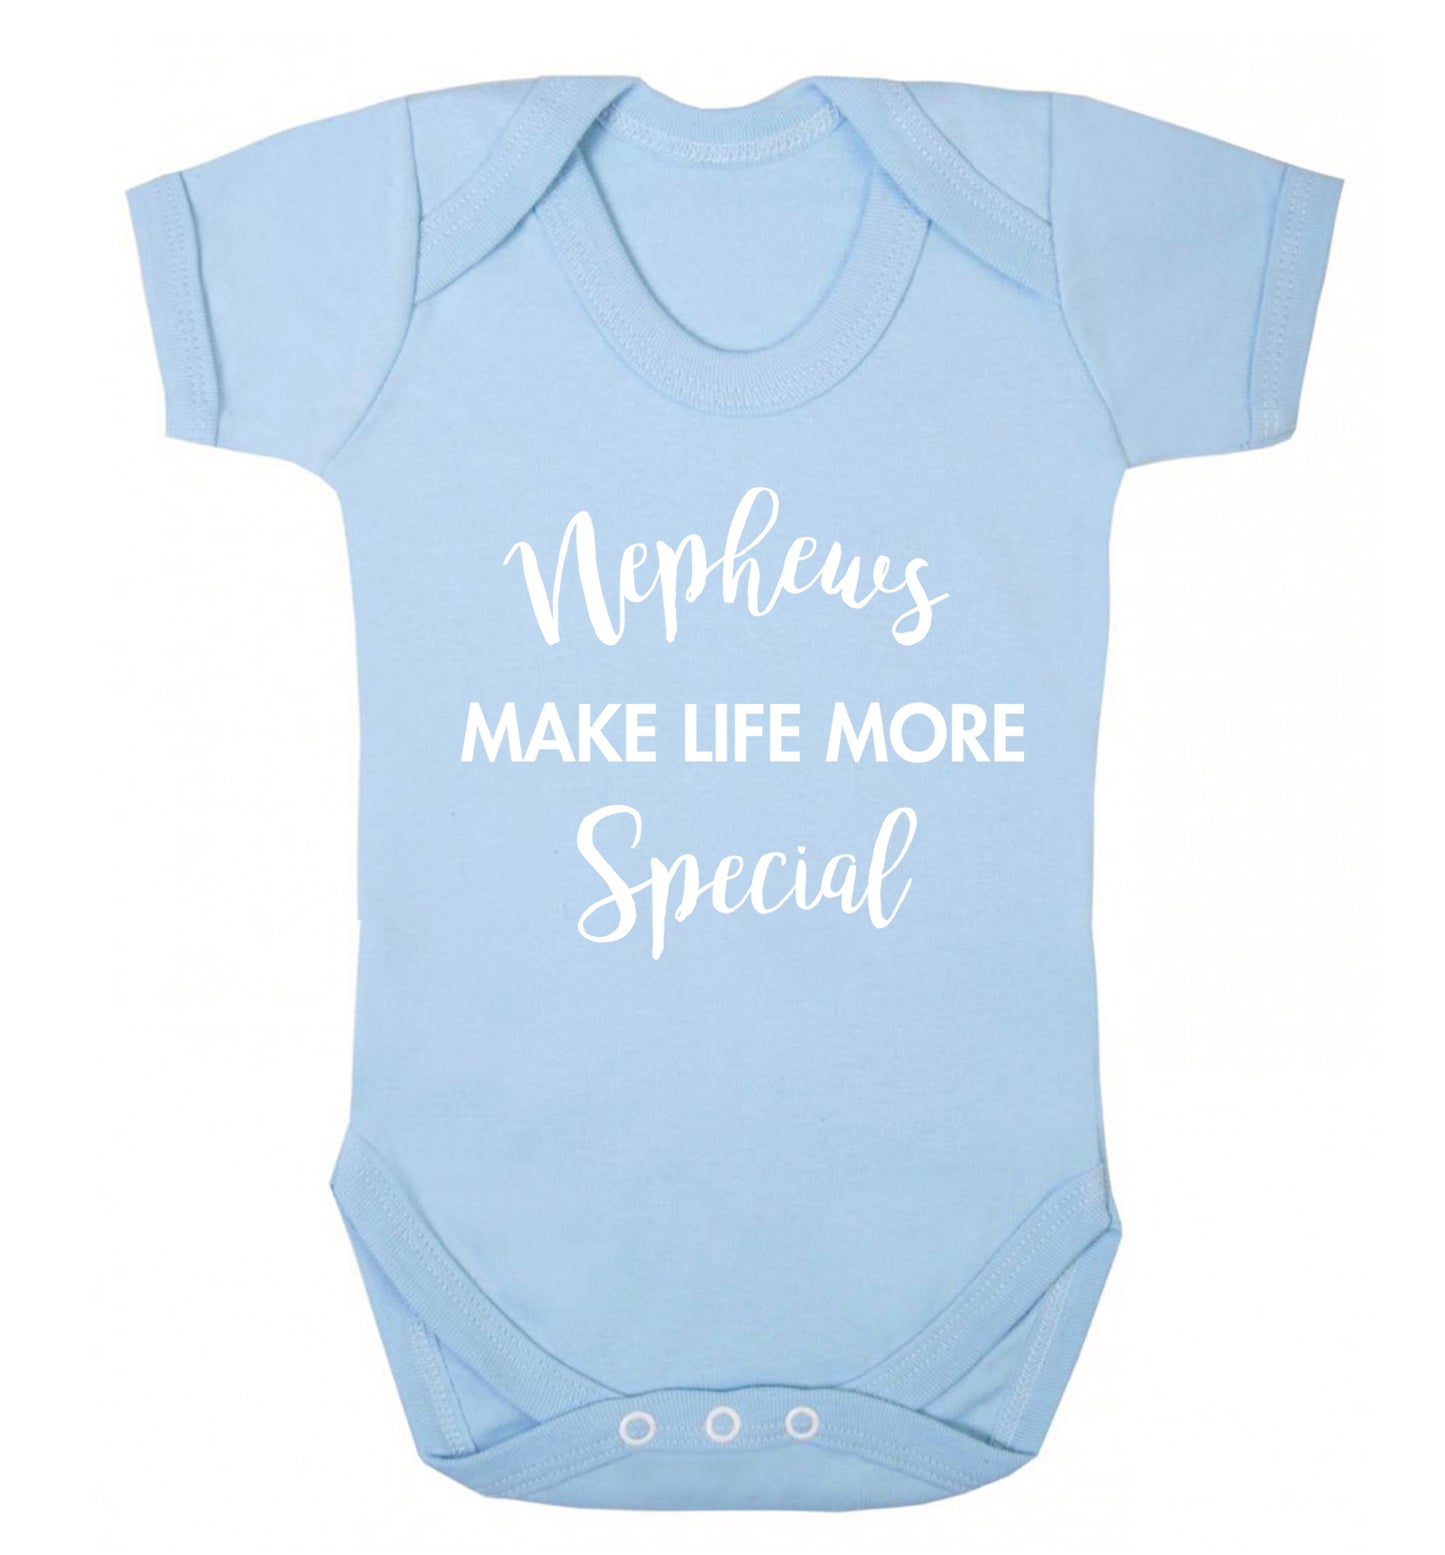 Nephews make life more special Baby Vest pale blue 18-24 months